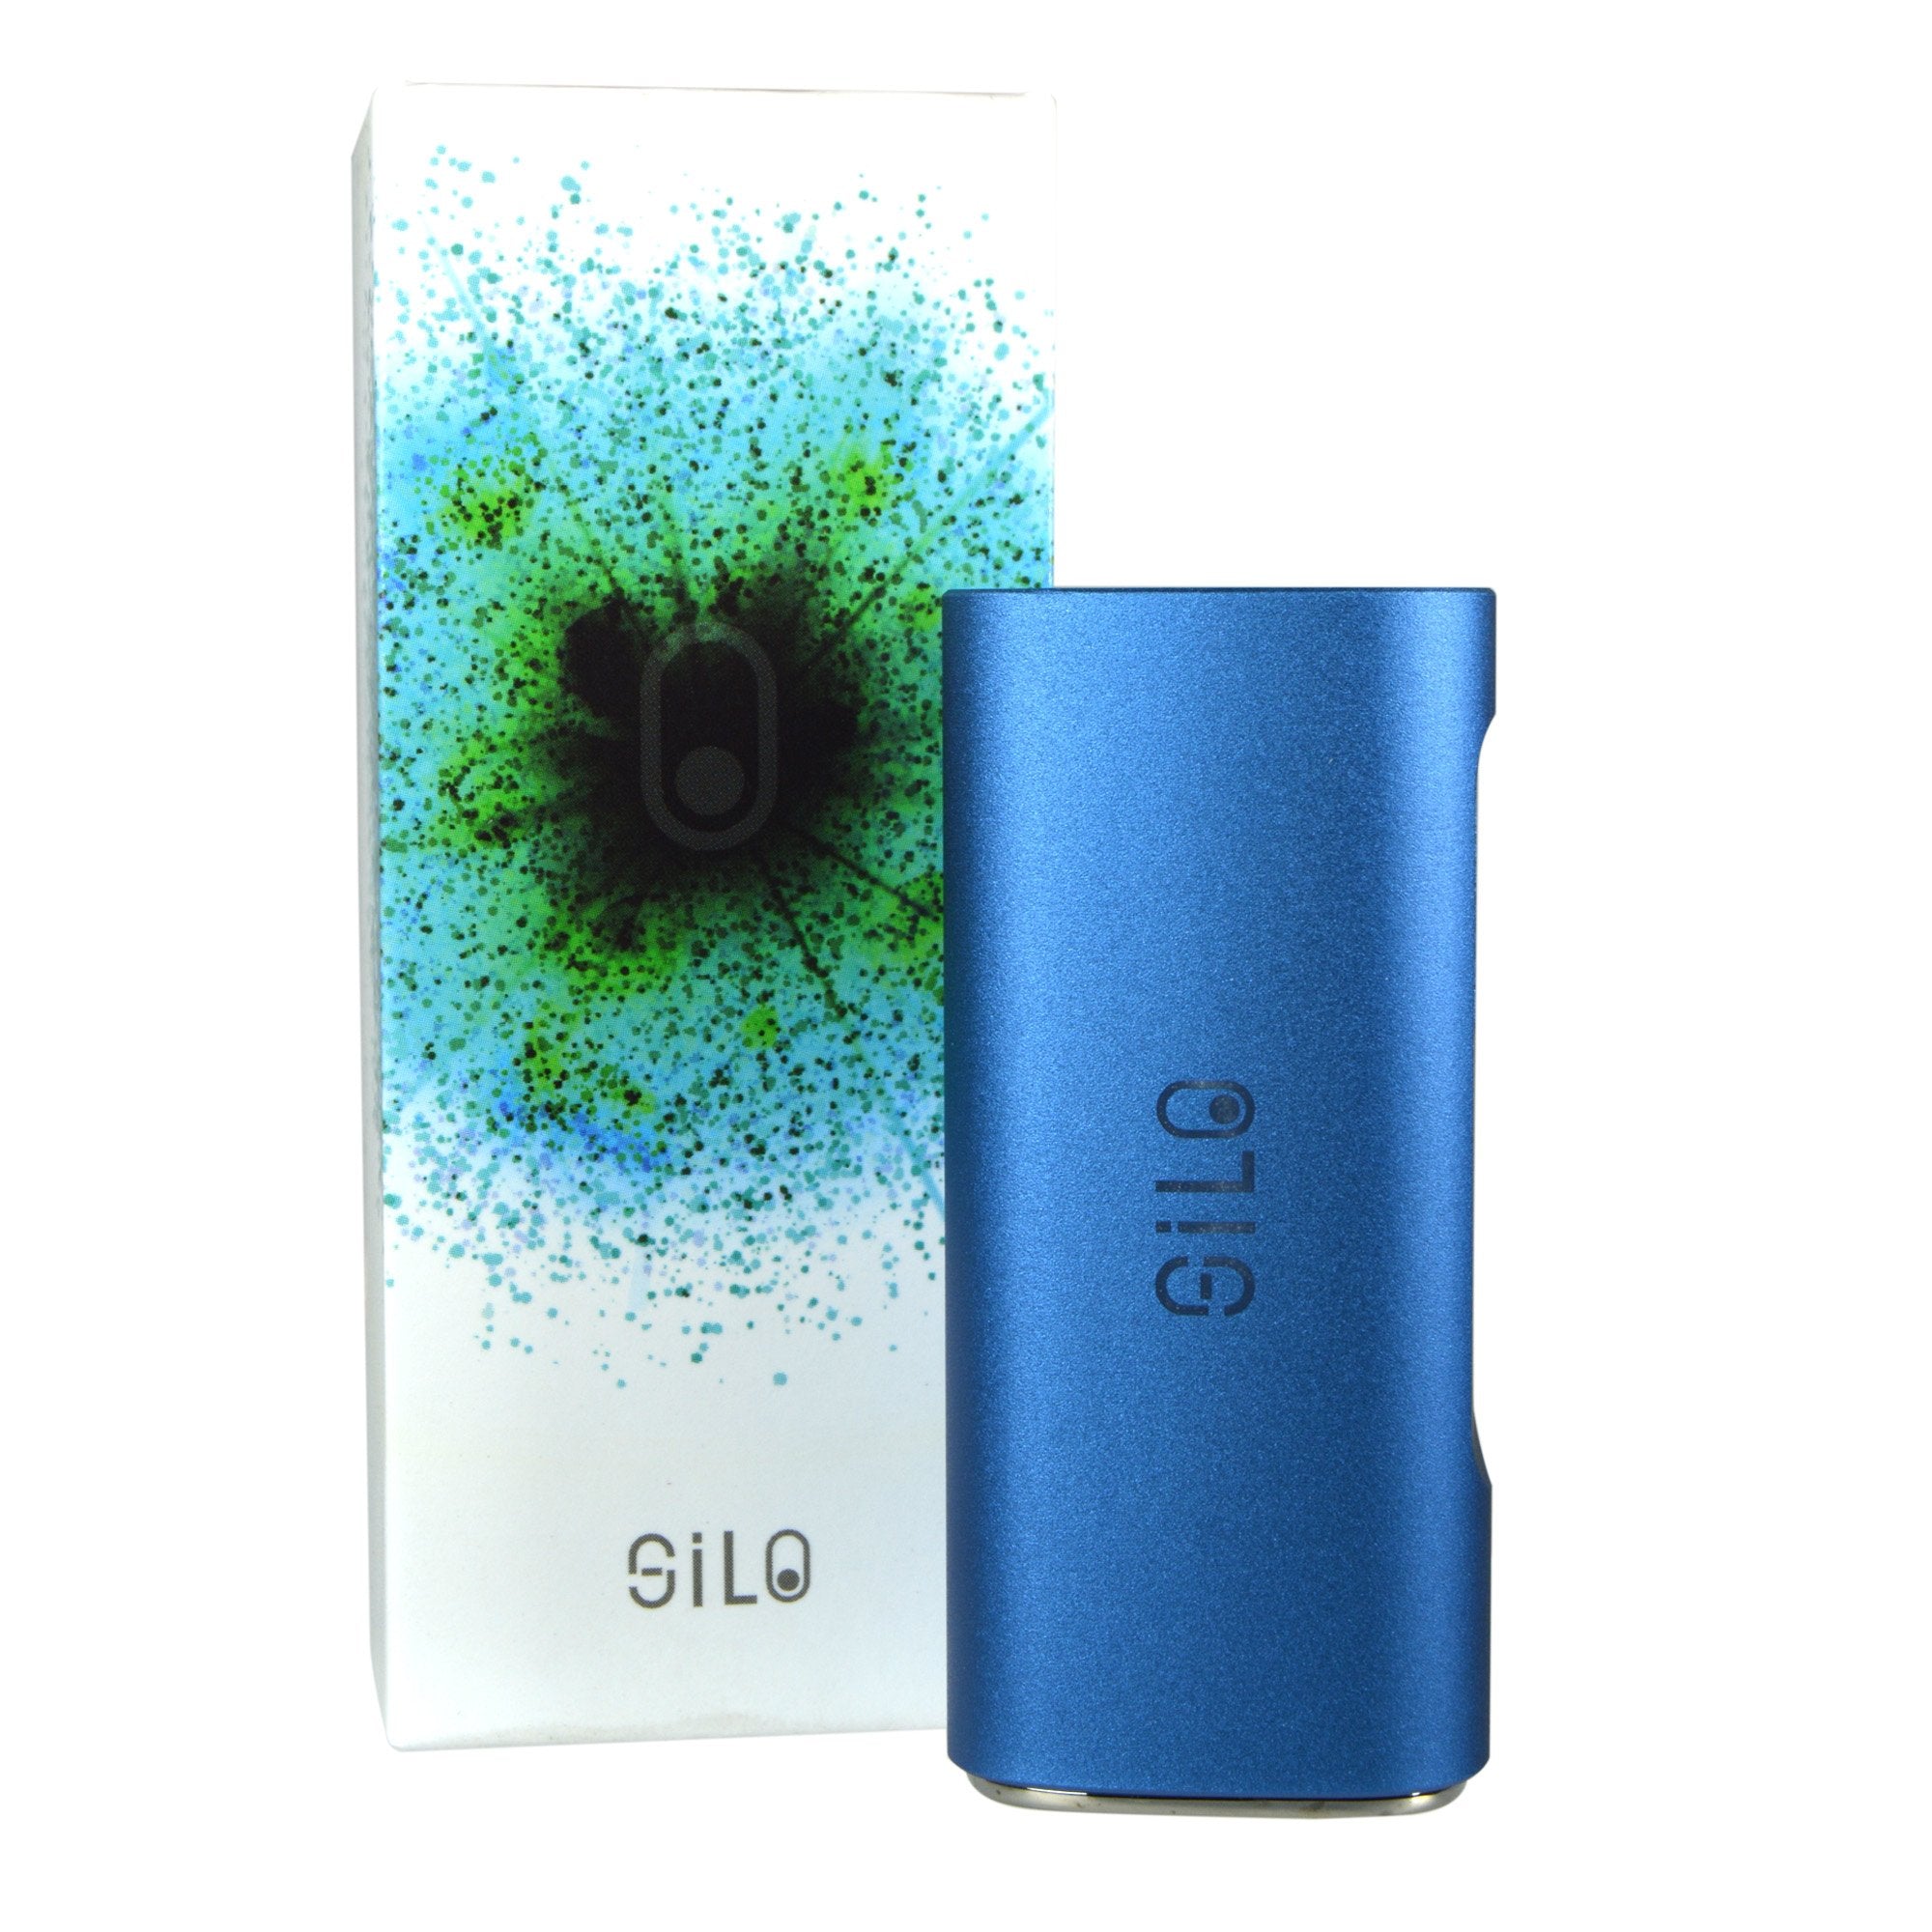 CCELL | Silo Vape Battery with USB Charger | 500mAh - Blue - 510 Thread - 1